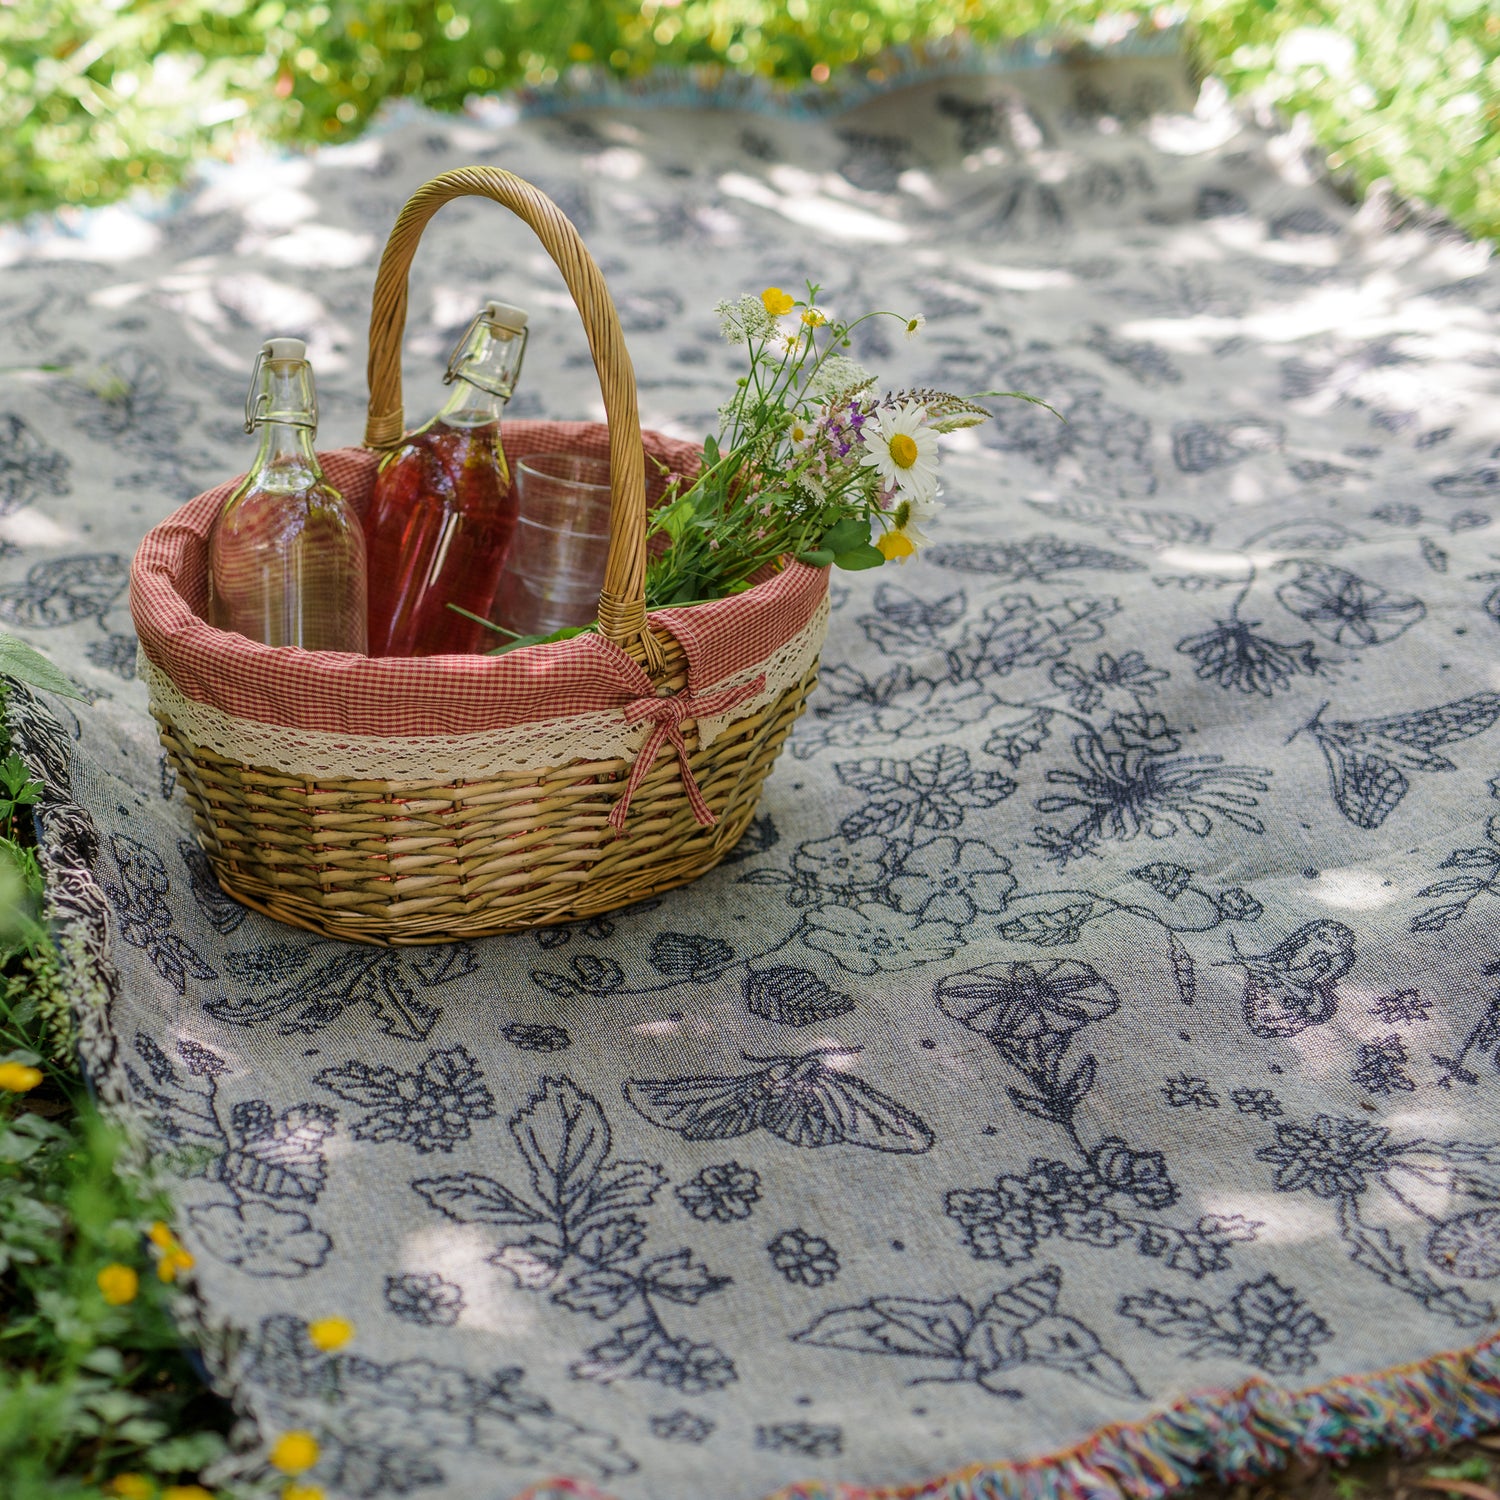 Pretty grey blanket with black pattern of moths, berries, leaves and flowers being usd as a picnic blanket